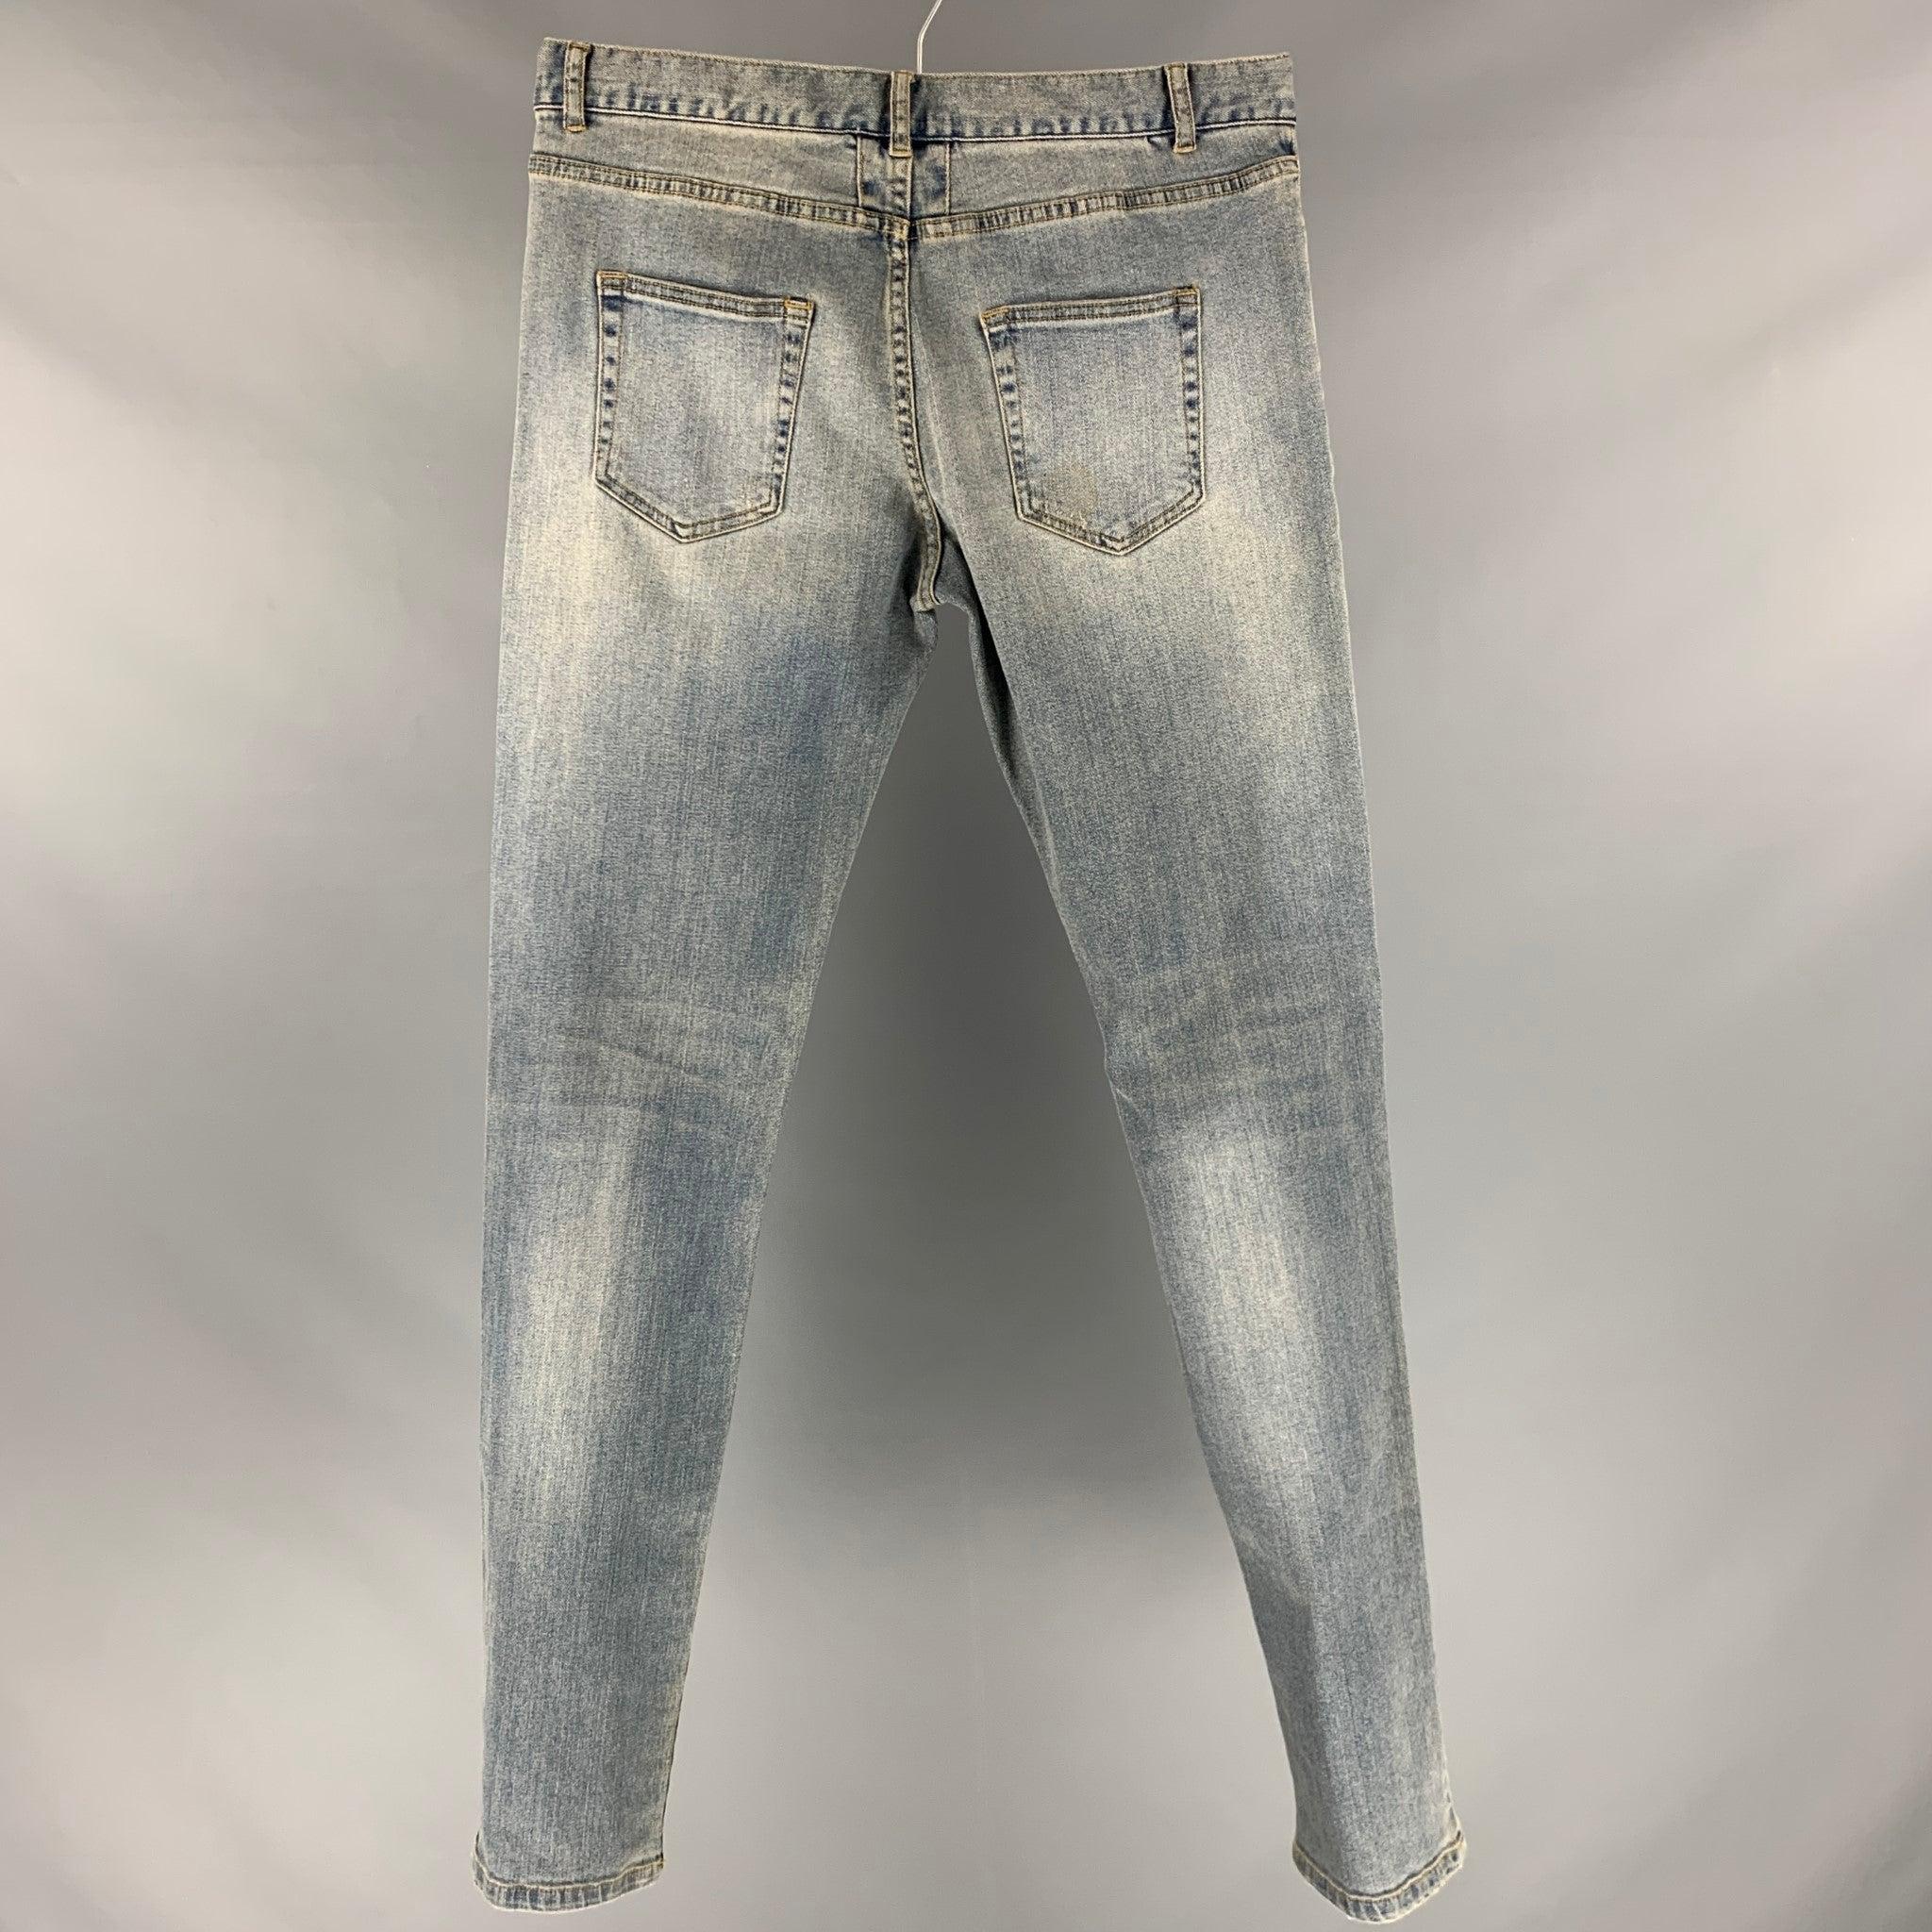 SAINT LAURENT x DO2 jeans comes in a blue denim woven material featuring a regular fit, five pockets, distressed detailing and zipper fly closure.Good Pre-Owned Condition. As-is. Please check photos. 

Marked:   size not marked 

Measurements: 
 